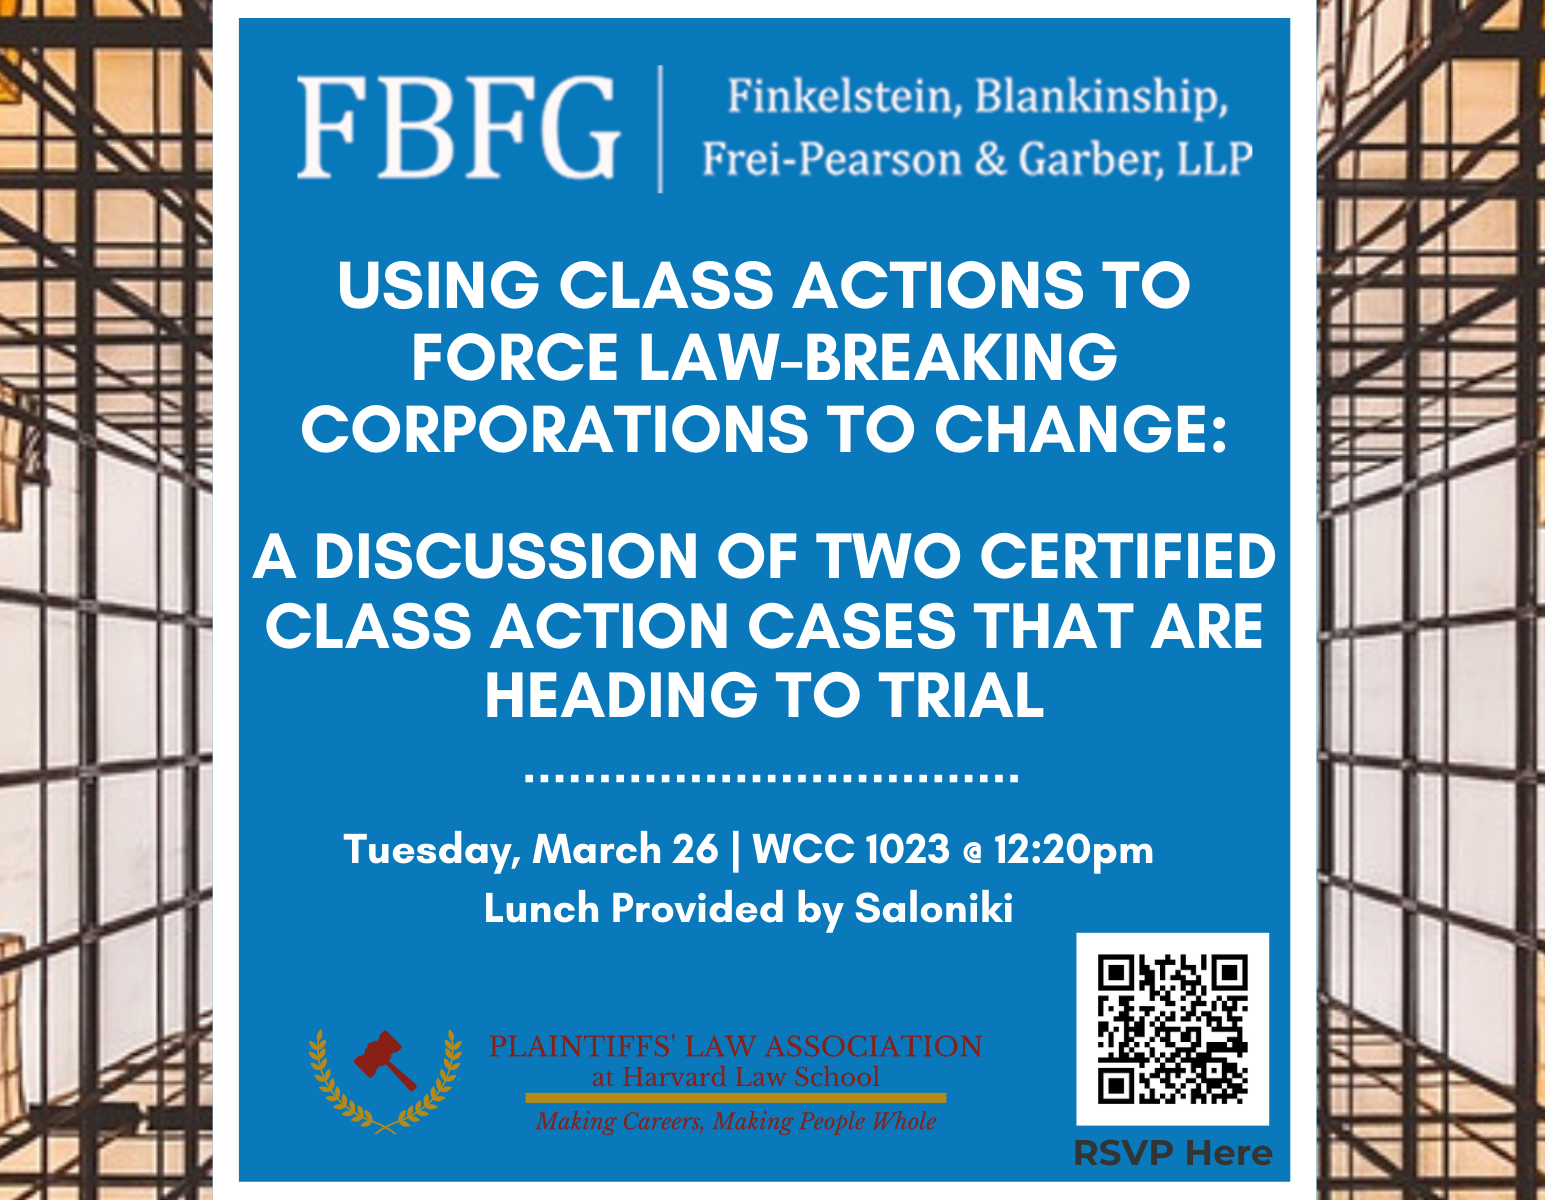 Using Class Actions to Force Law-Breaking Corporations to Change: A discussion of Two Certified Class Actions that are Heading to Trial Tuesday, March 26 12:20 PM – 1:20 PM, WCC 1023 Lunch from Saloniki will be provided.